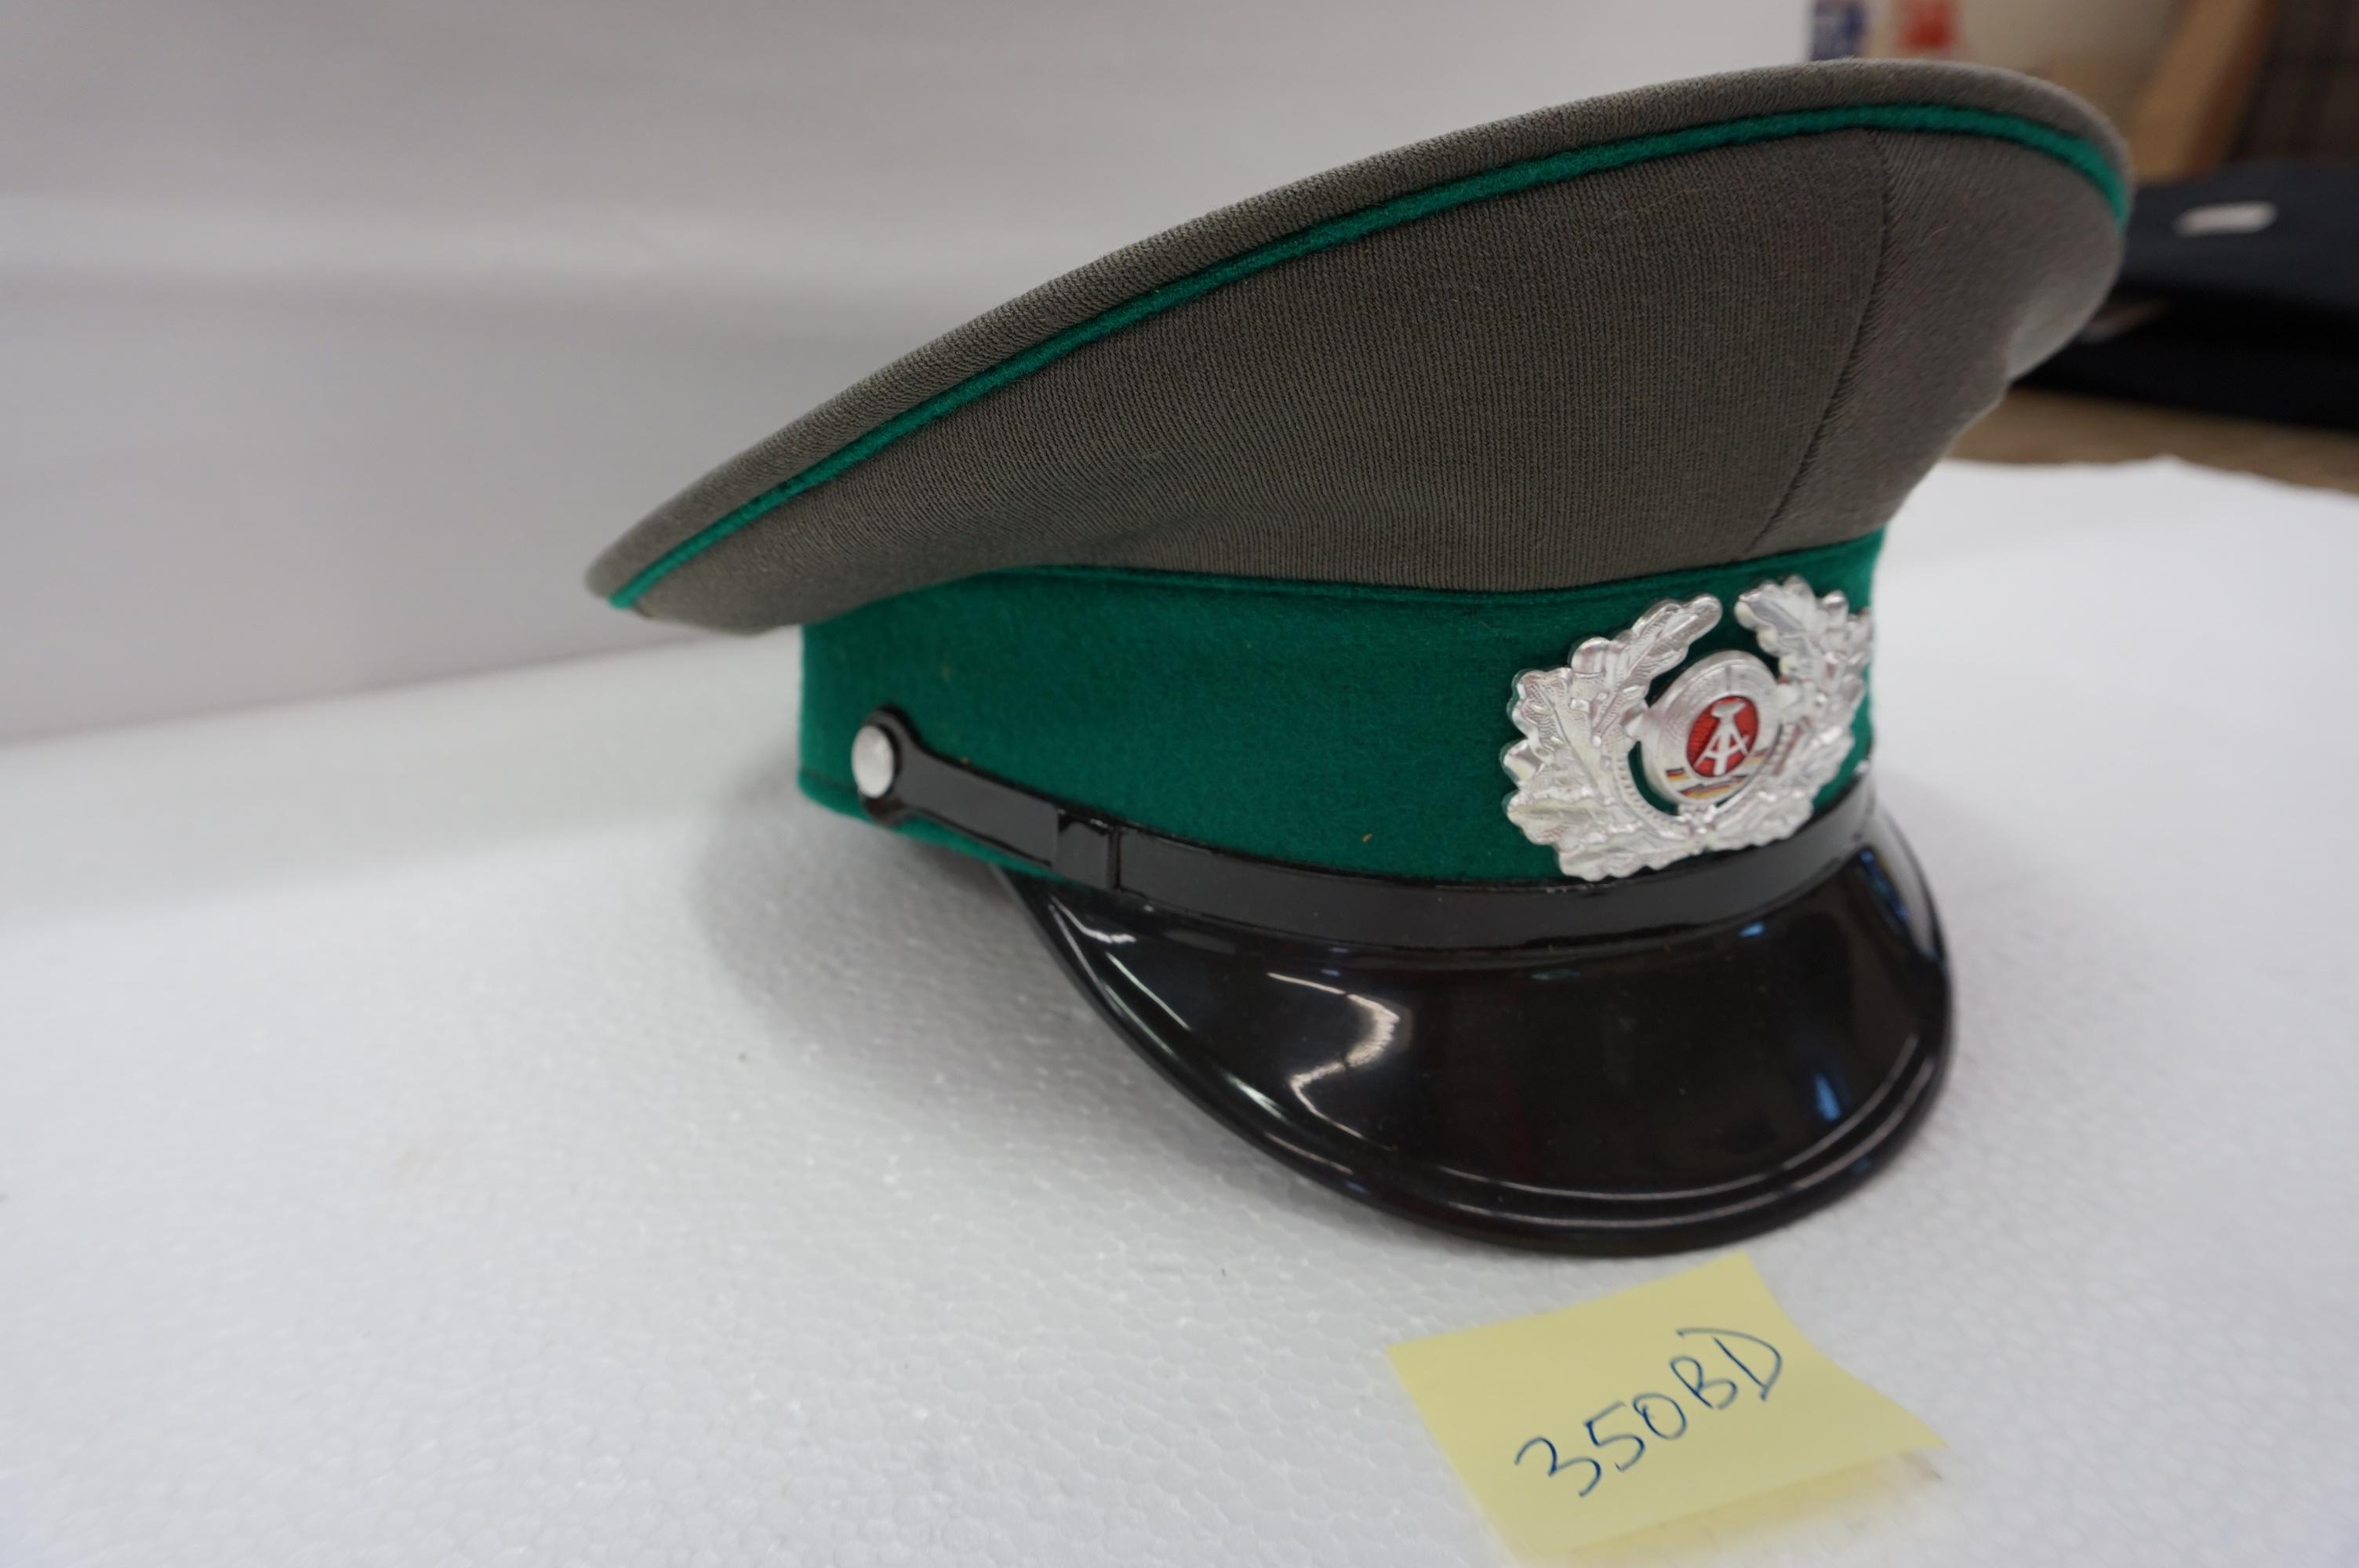 Cold War: East German Officer's Hat, Mint Condition